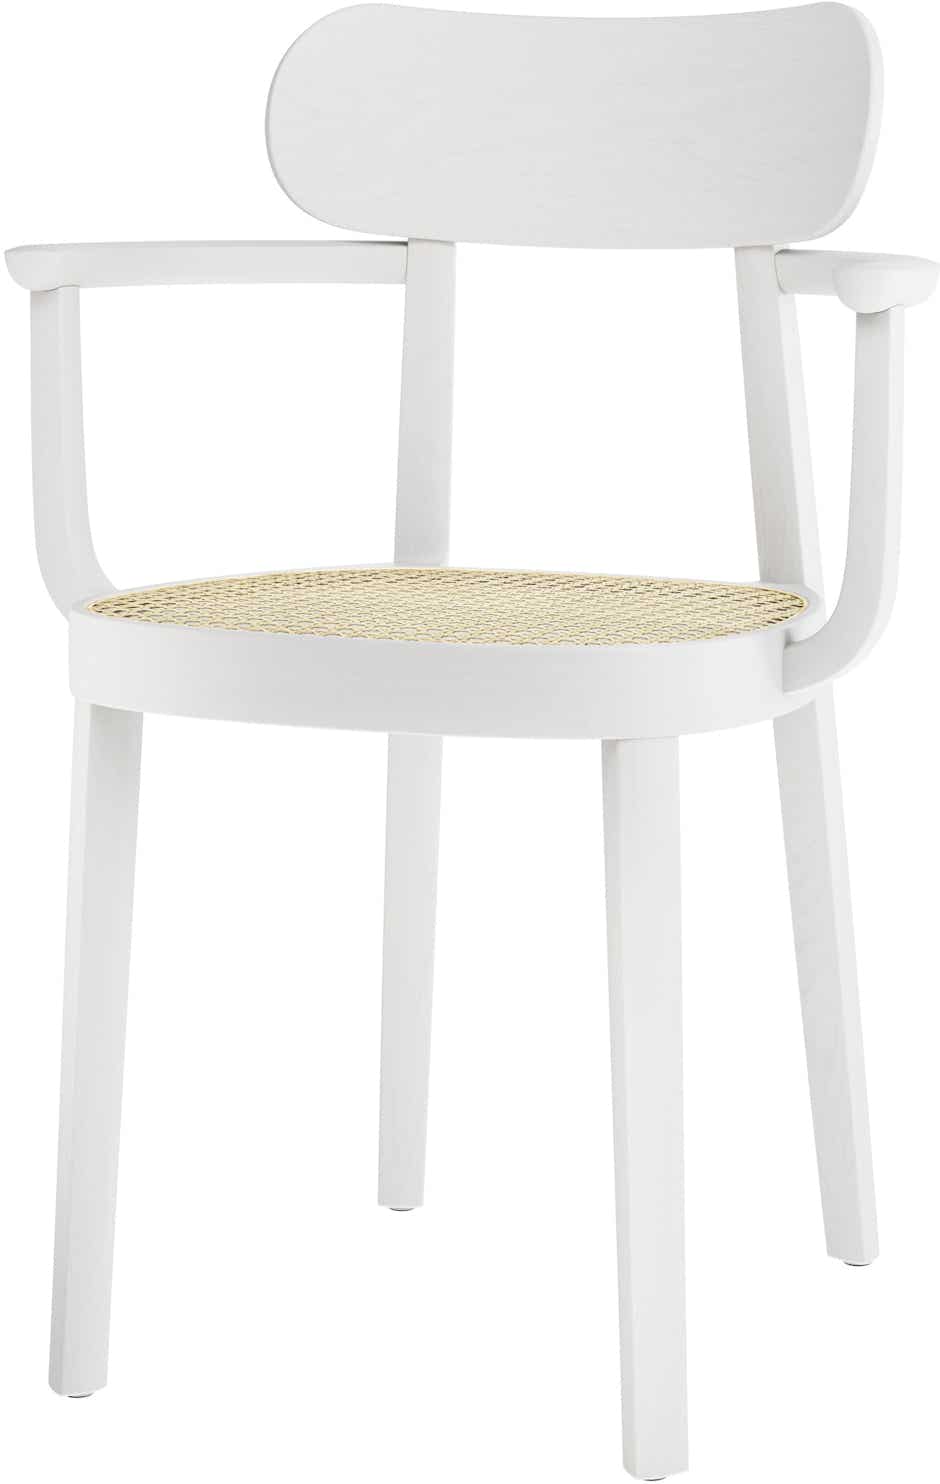 118 / 118 F chair (cane seat) White pigmented lacquer beech